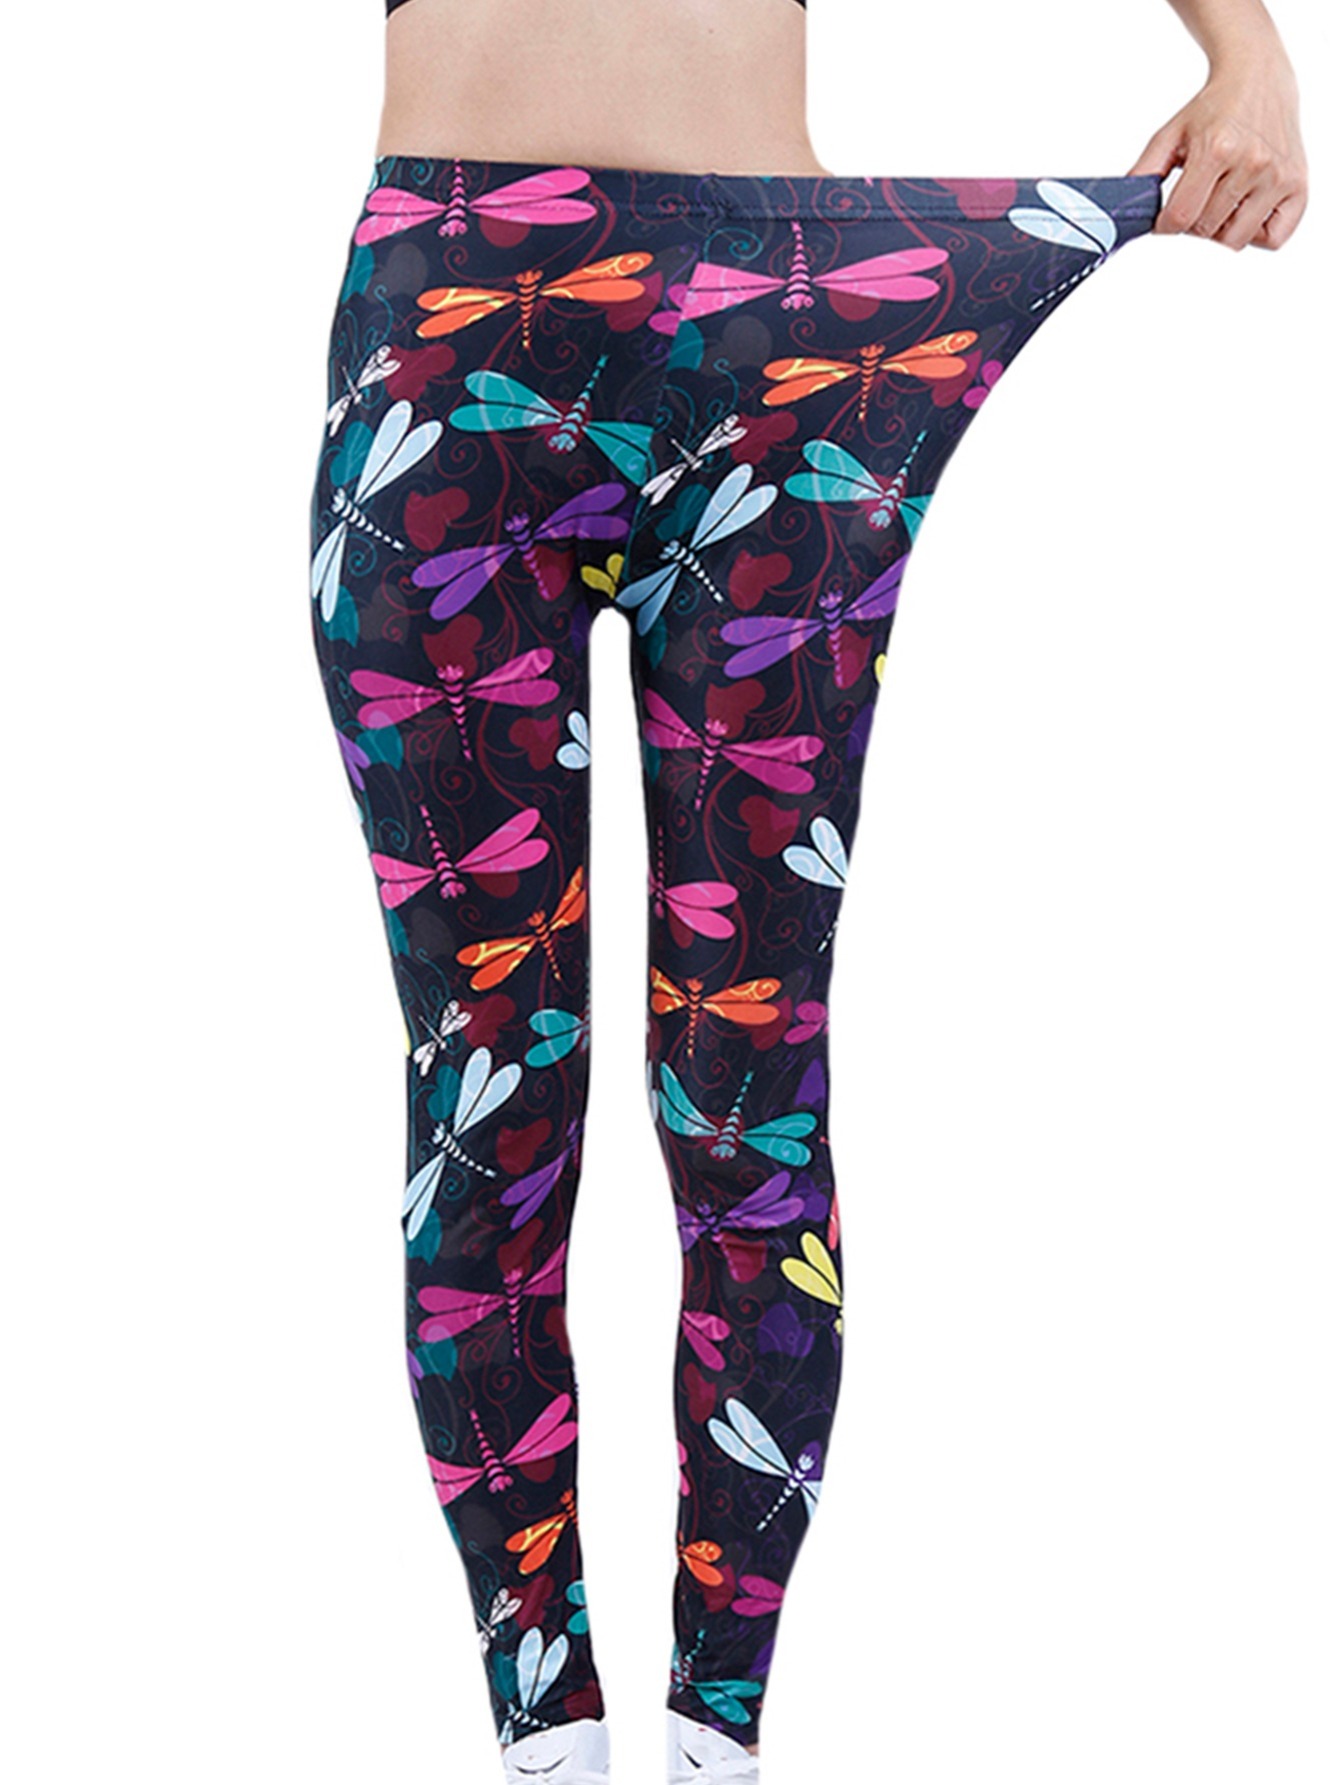 Mid Rise Leggings with Lycra – Dragonfly